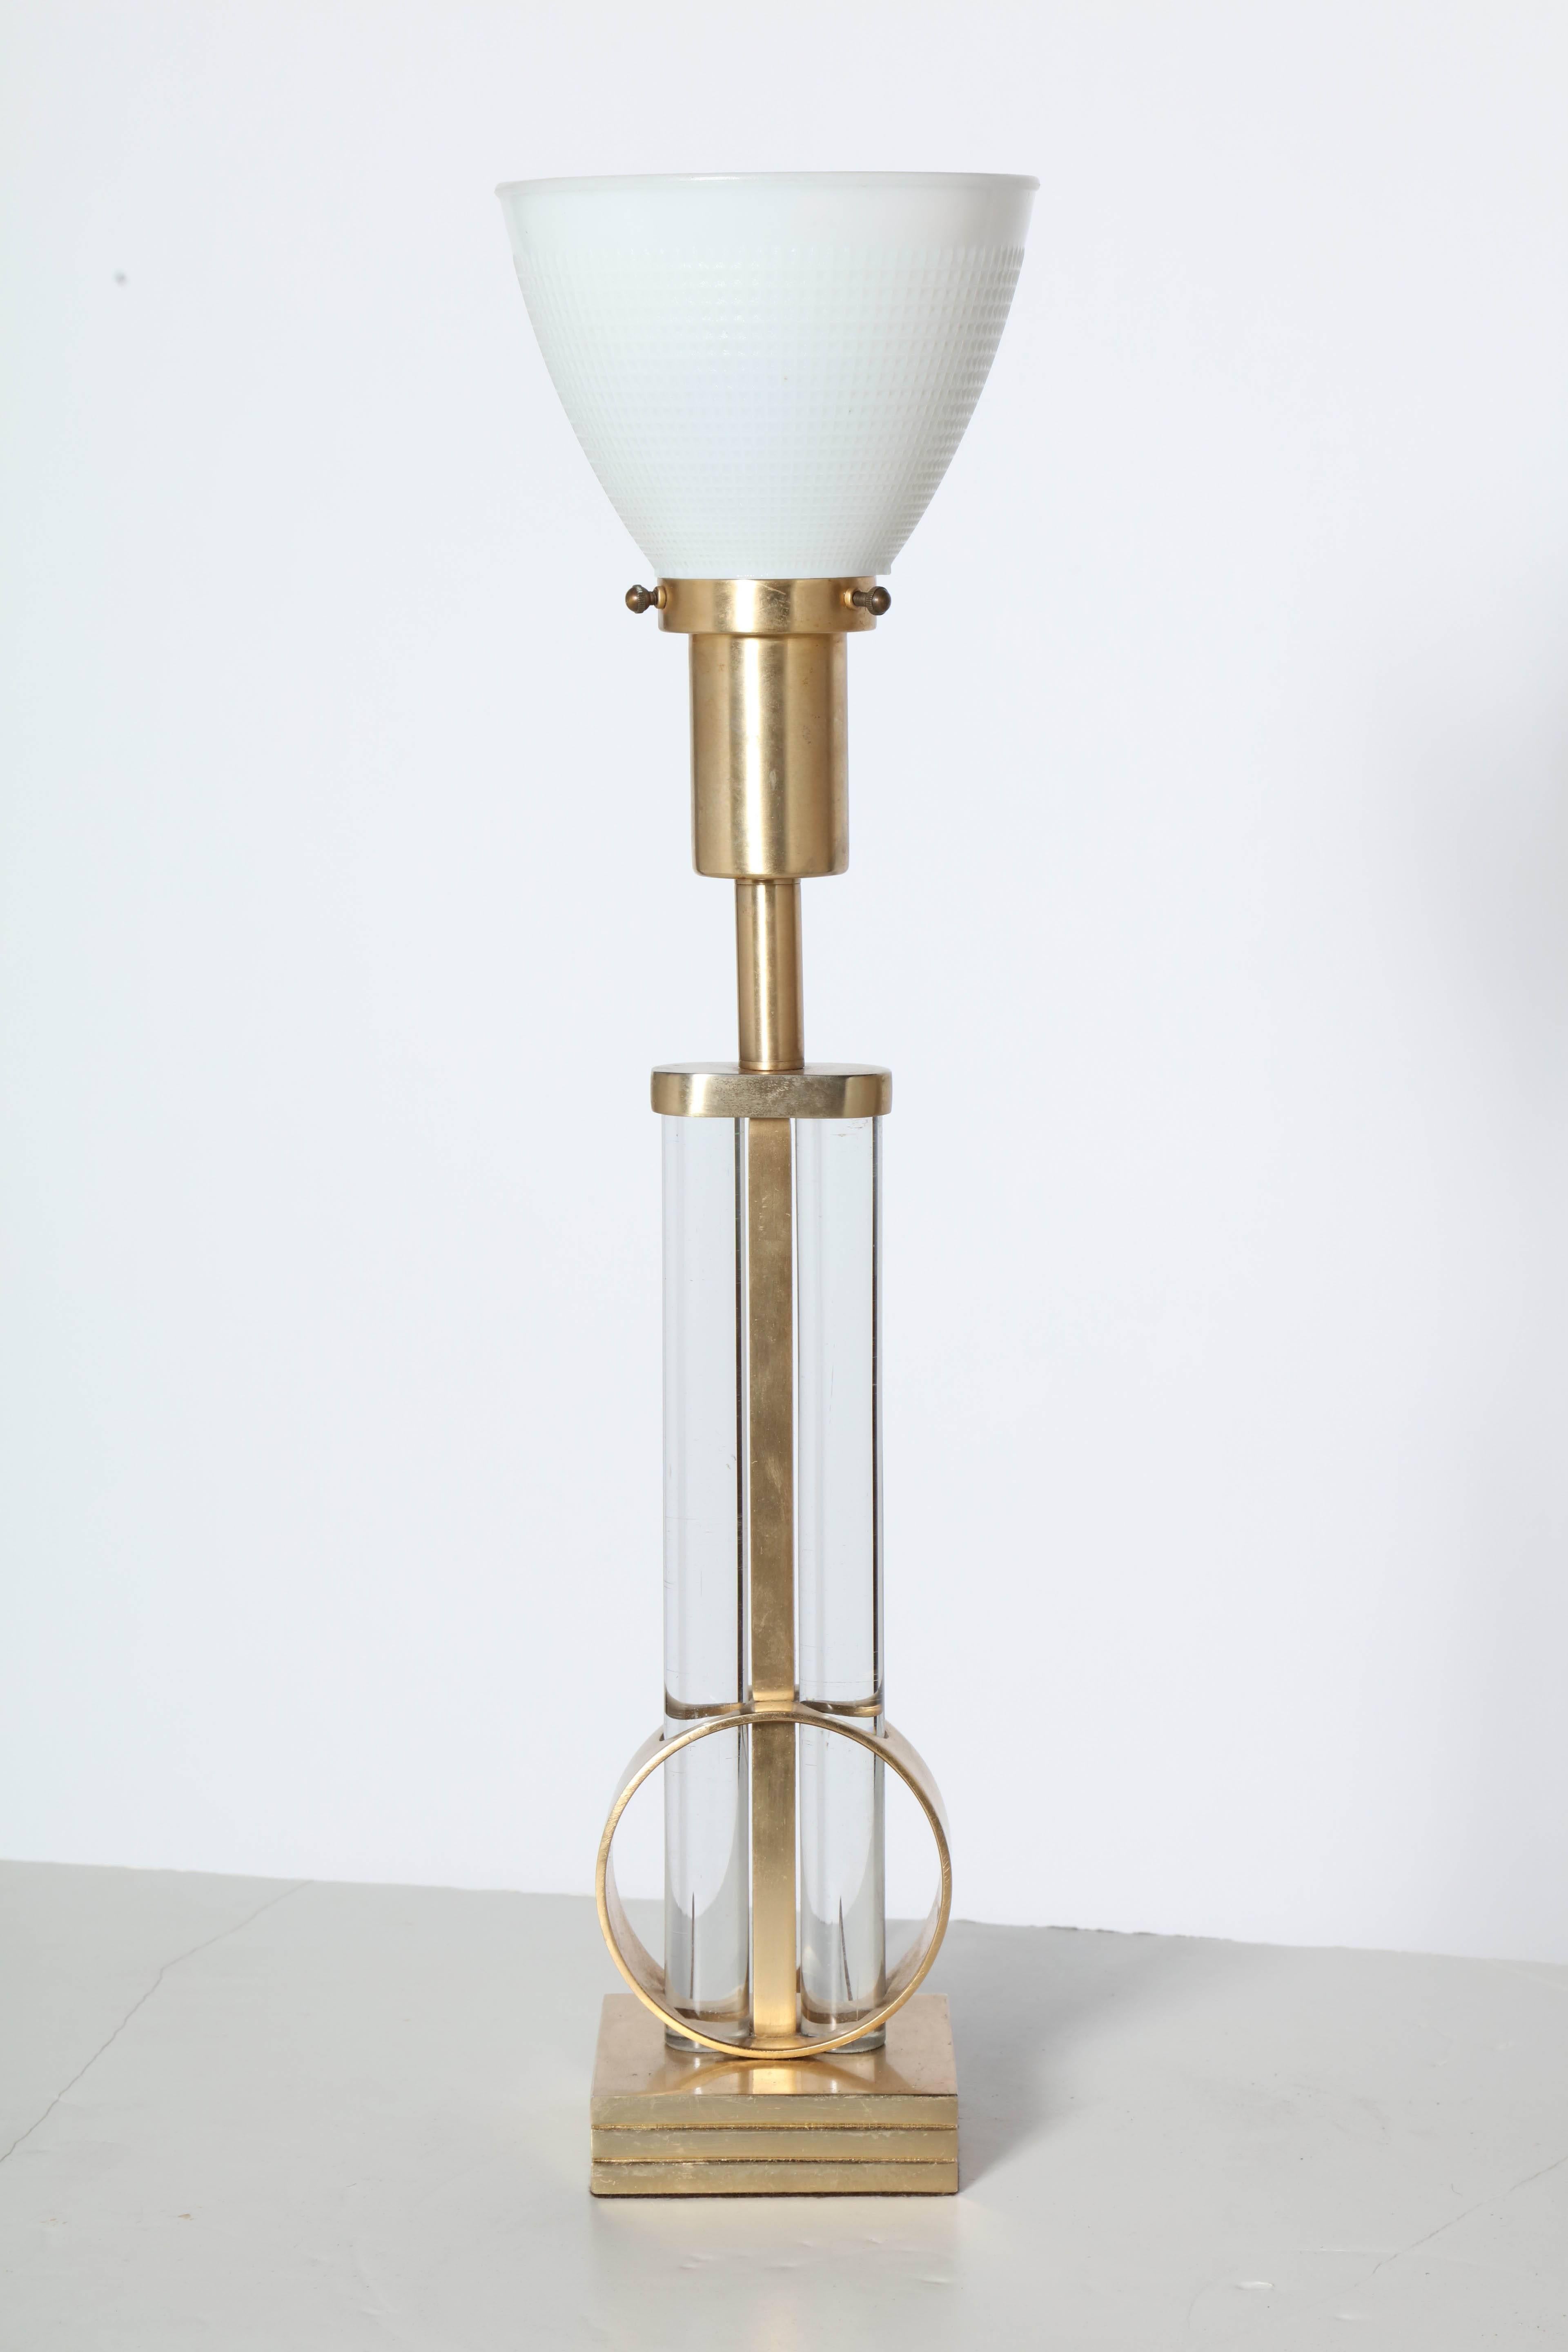 Gilbert Rohde for Mutual Sunset Lamp Company 4660 Glass and Brass Table Lamp with White Glass Shade. Featuring Brass vertical shaft, two transparent parallel Glass rods with White Milk Glass diffuser Shade (5H x 6W) and 4 inch square Brass base.